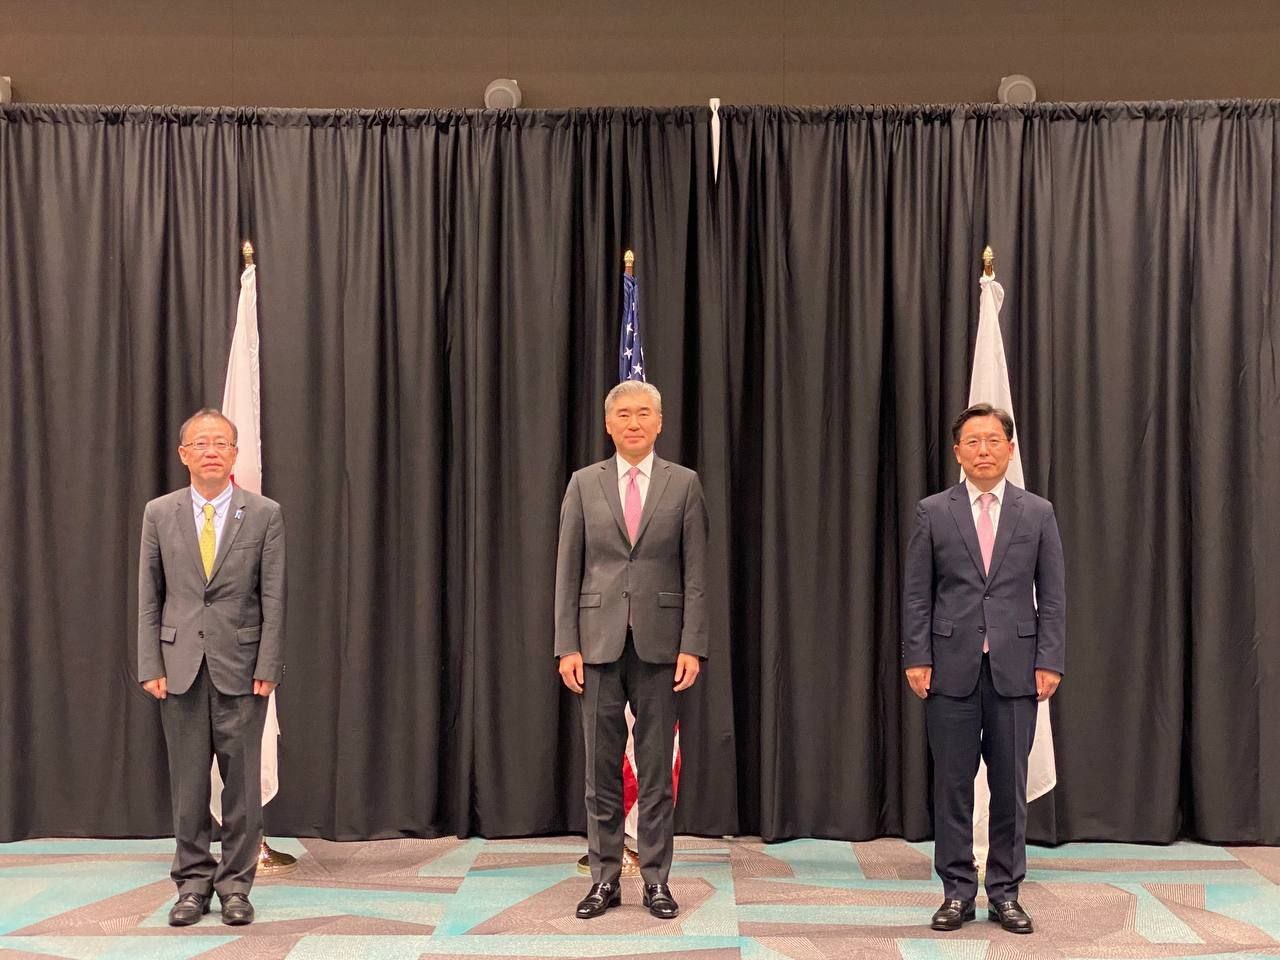 From left: Takehiro Funakoshi, director general of Japan's Asian affairs bureau, Sung Kim, US Special Representative for North Korea, and Noh Kyu-duk, special representative for Korean peace and security, pose prior to their talks in Honolulu, Hawaii on Thursday. (Ministry of Foreign Affairs)